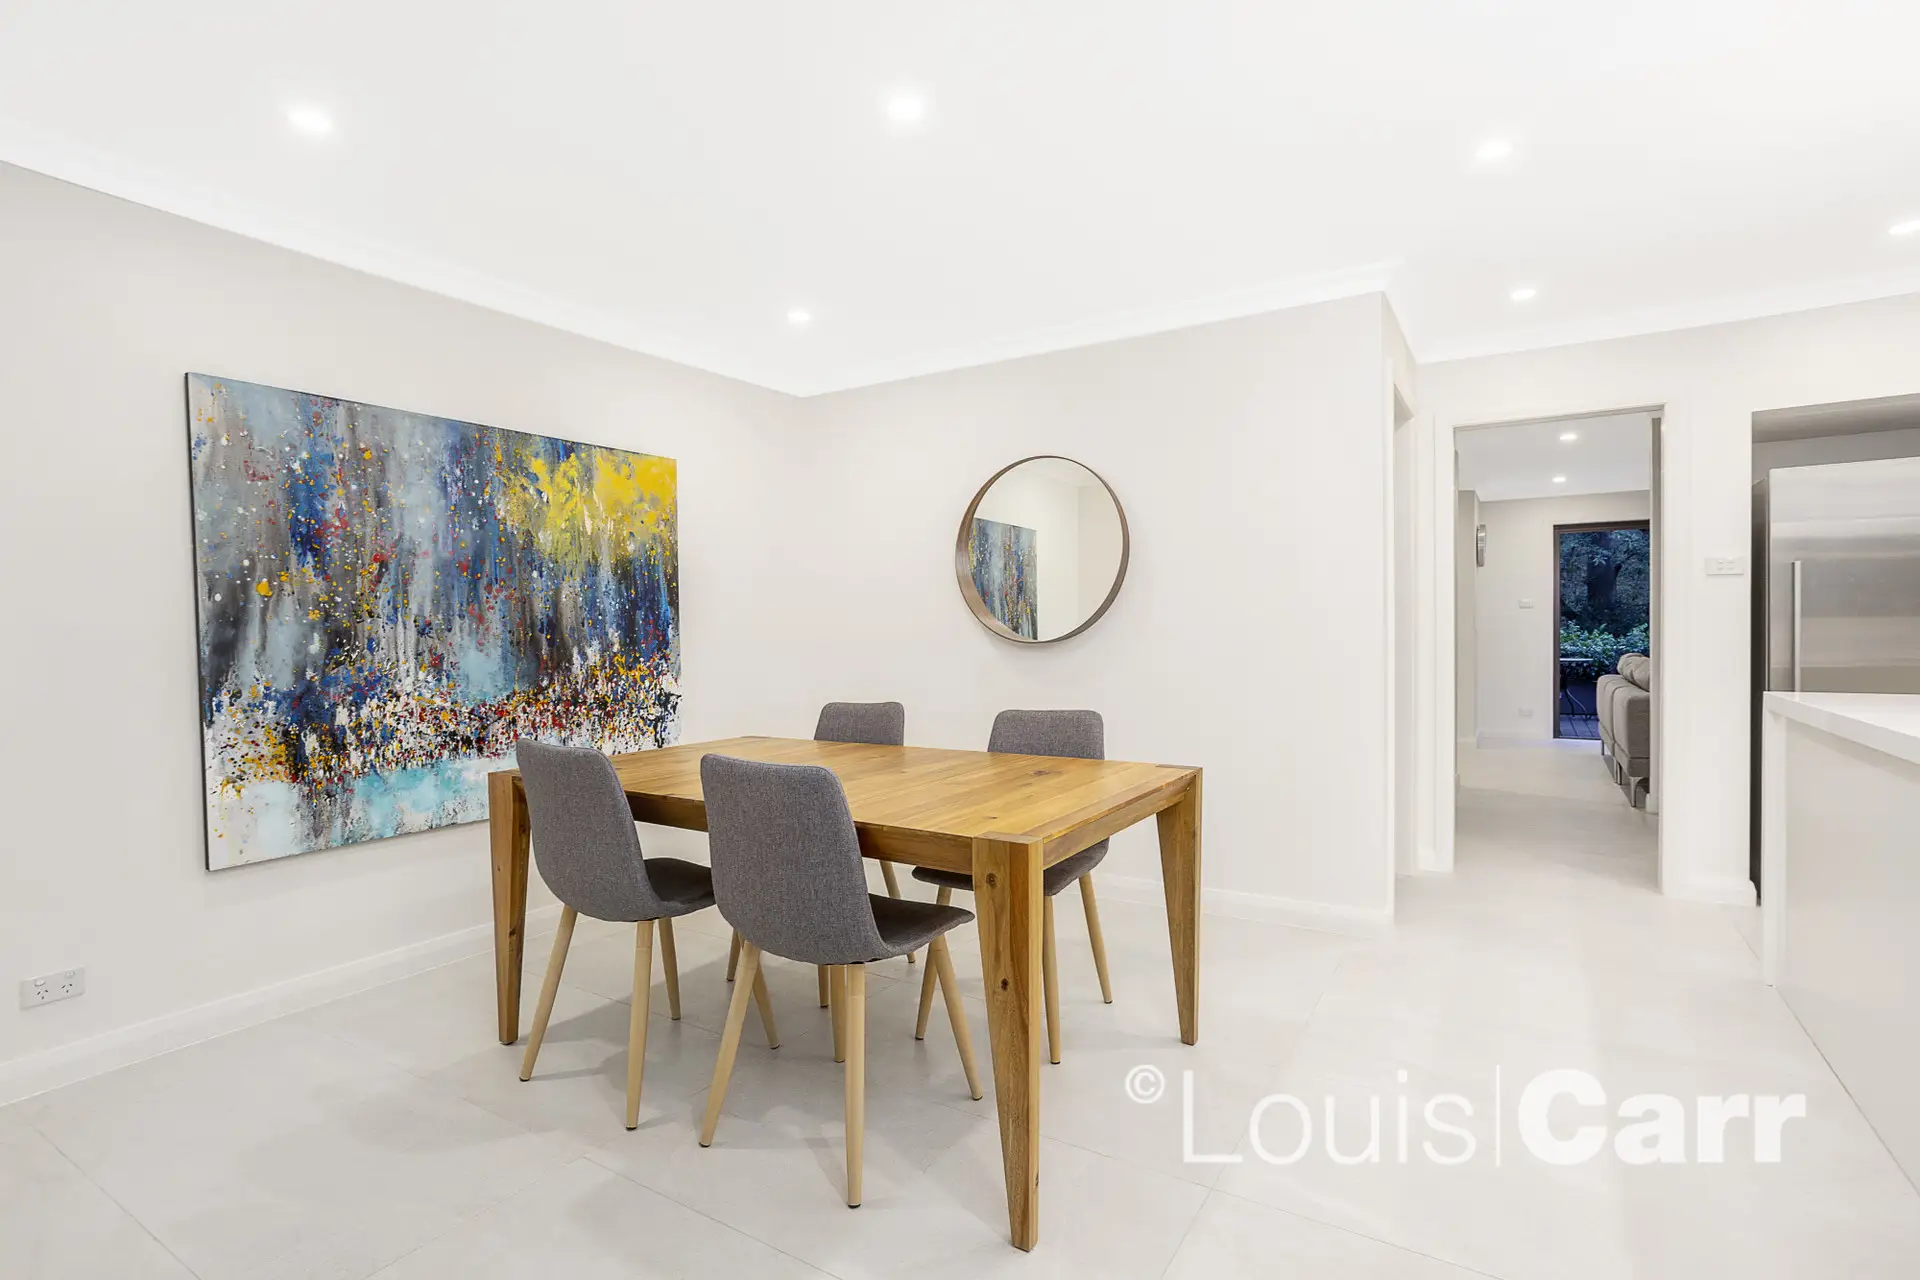 Photo #5: 5a Neptune Place, West Pennant Hills - Sold by Louis Carr Real Estate